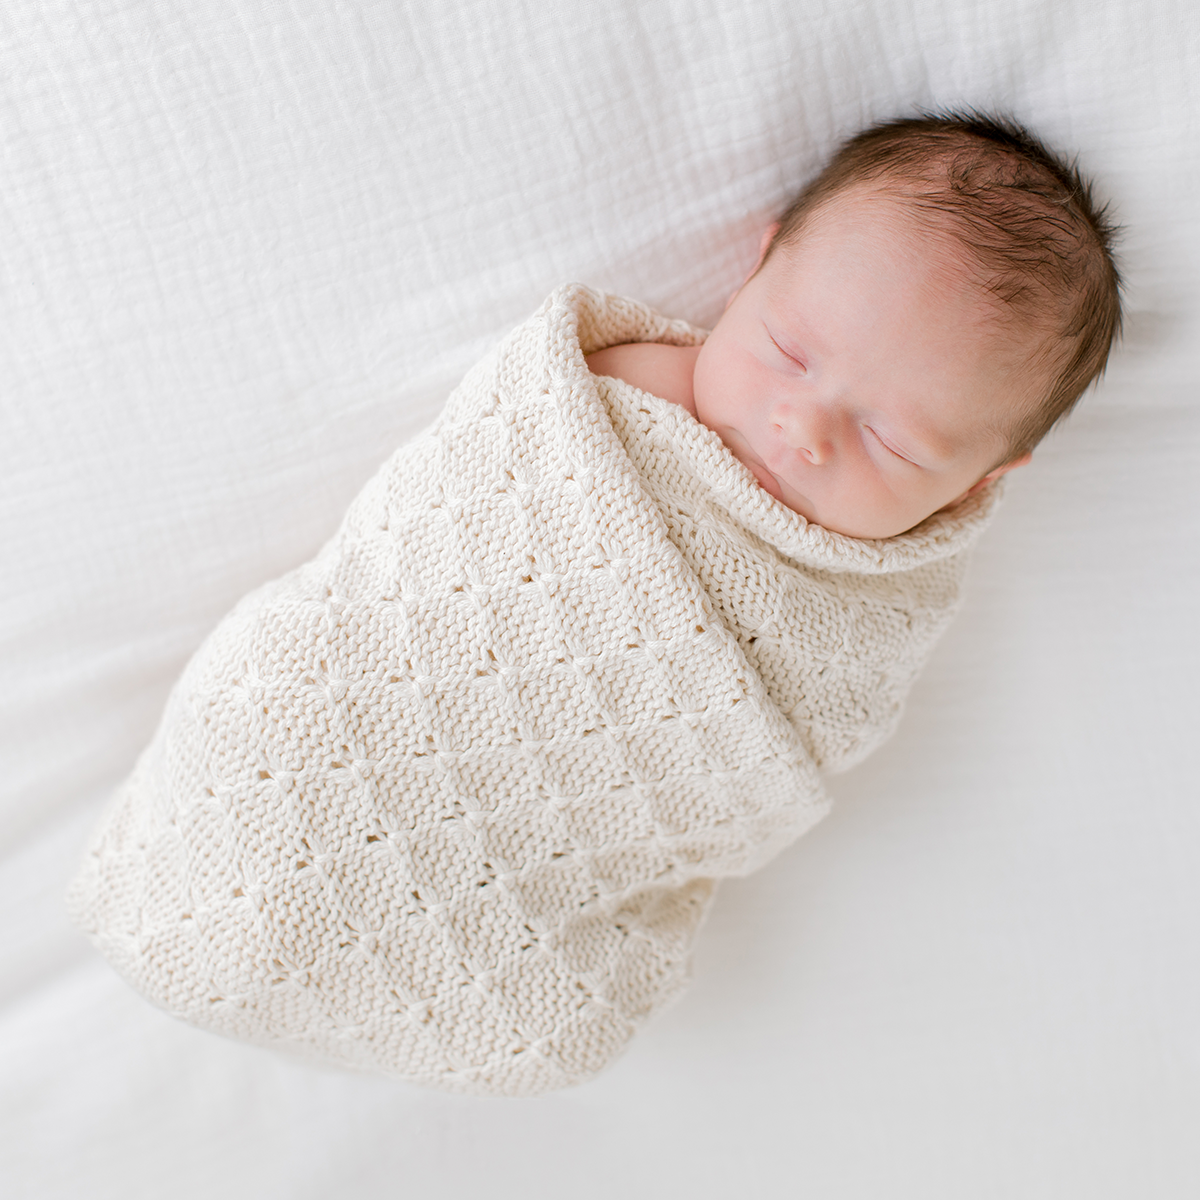 Baby Cocoon, Snuggly, Sleep Sack, Wrap Knitting Patterns - In the Loop  Knitting